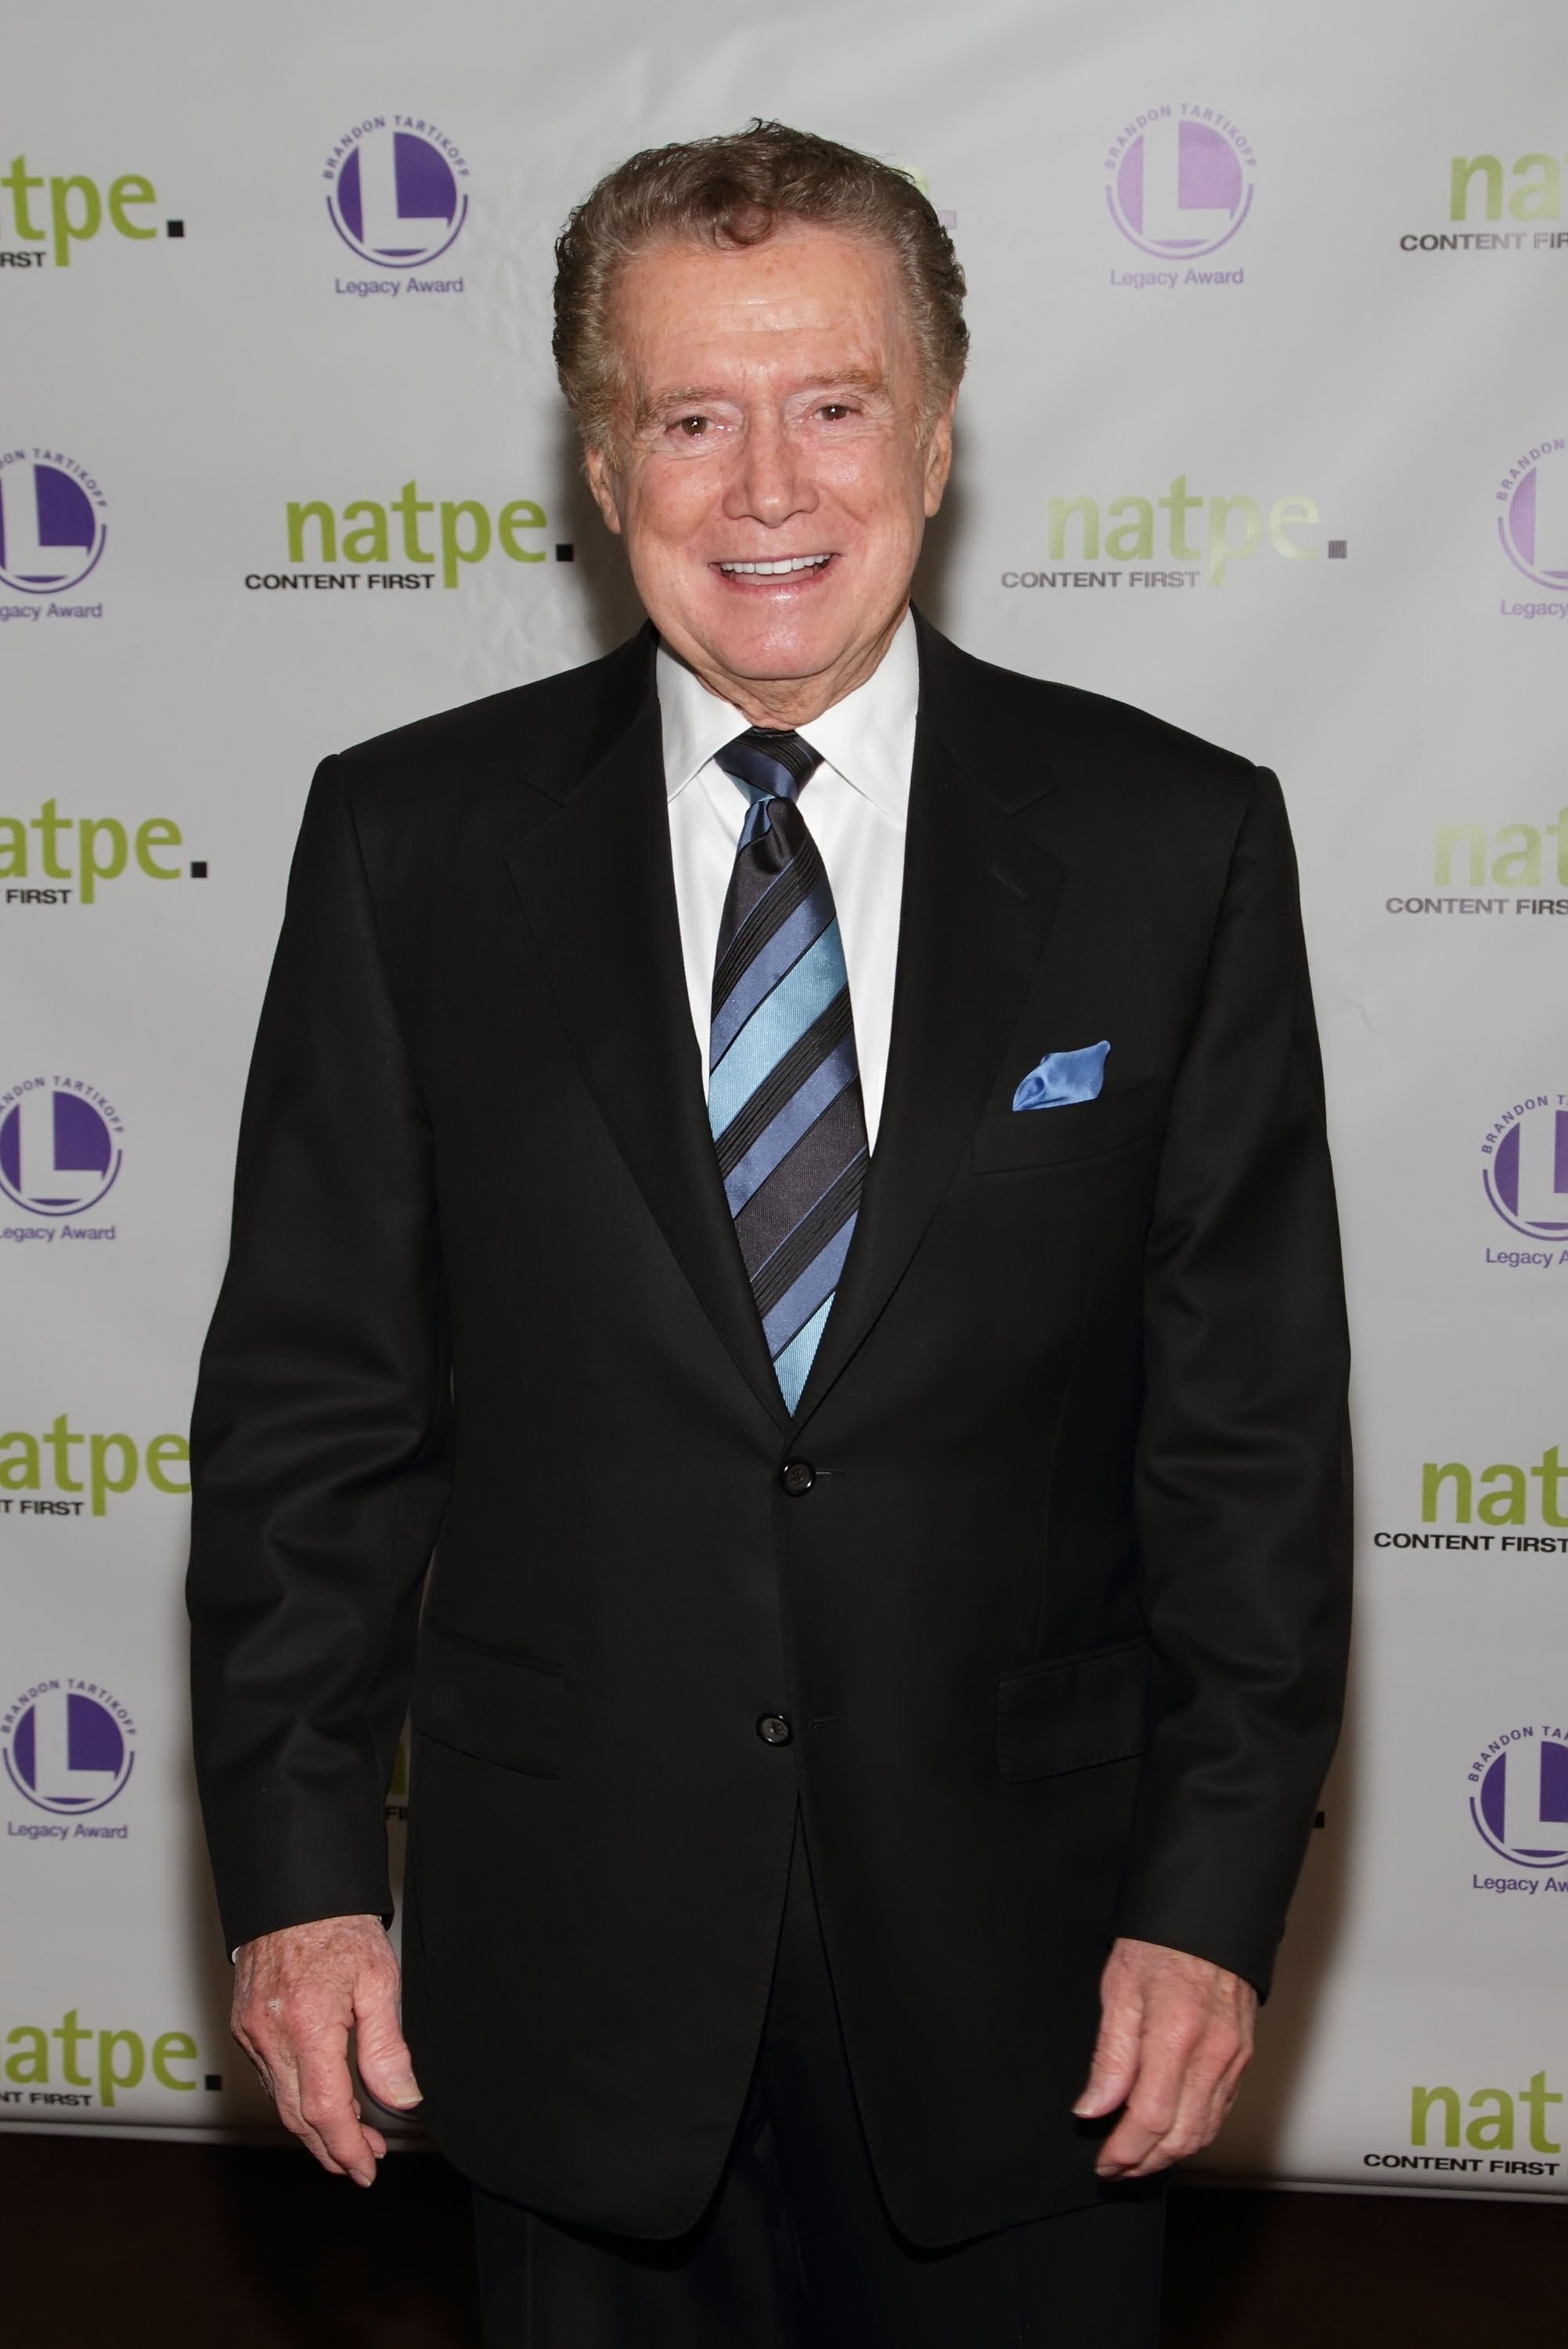 Television host Regis Philbin a the 8th Annual NATPE Brandon Tartikoff Legacy Awards at Fontainebleau Miami Beach on January 25, 2011 | Photo: Getty Images